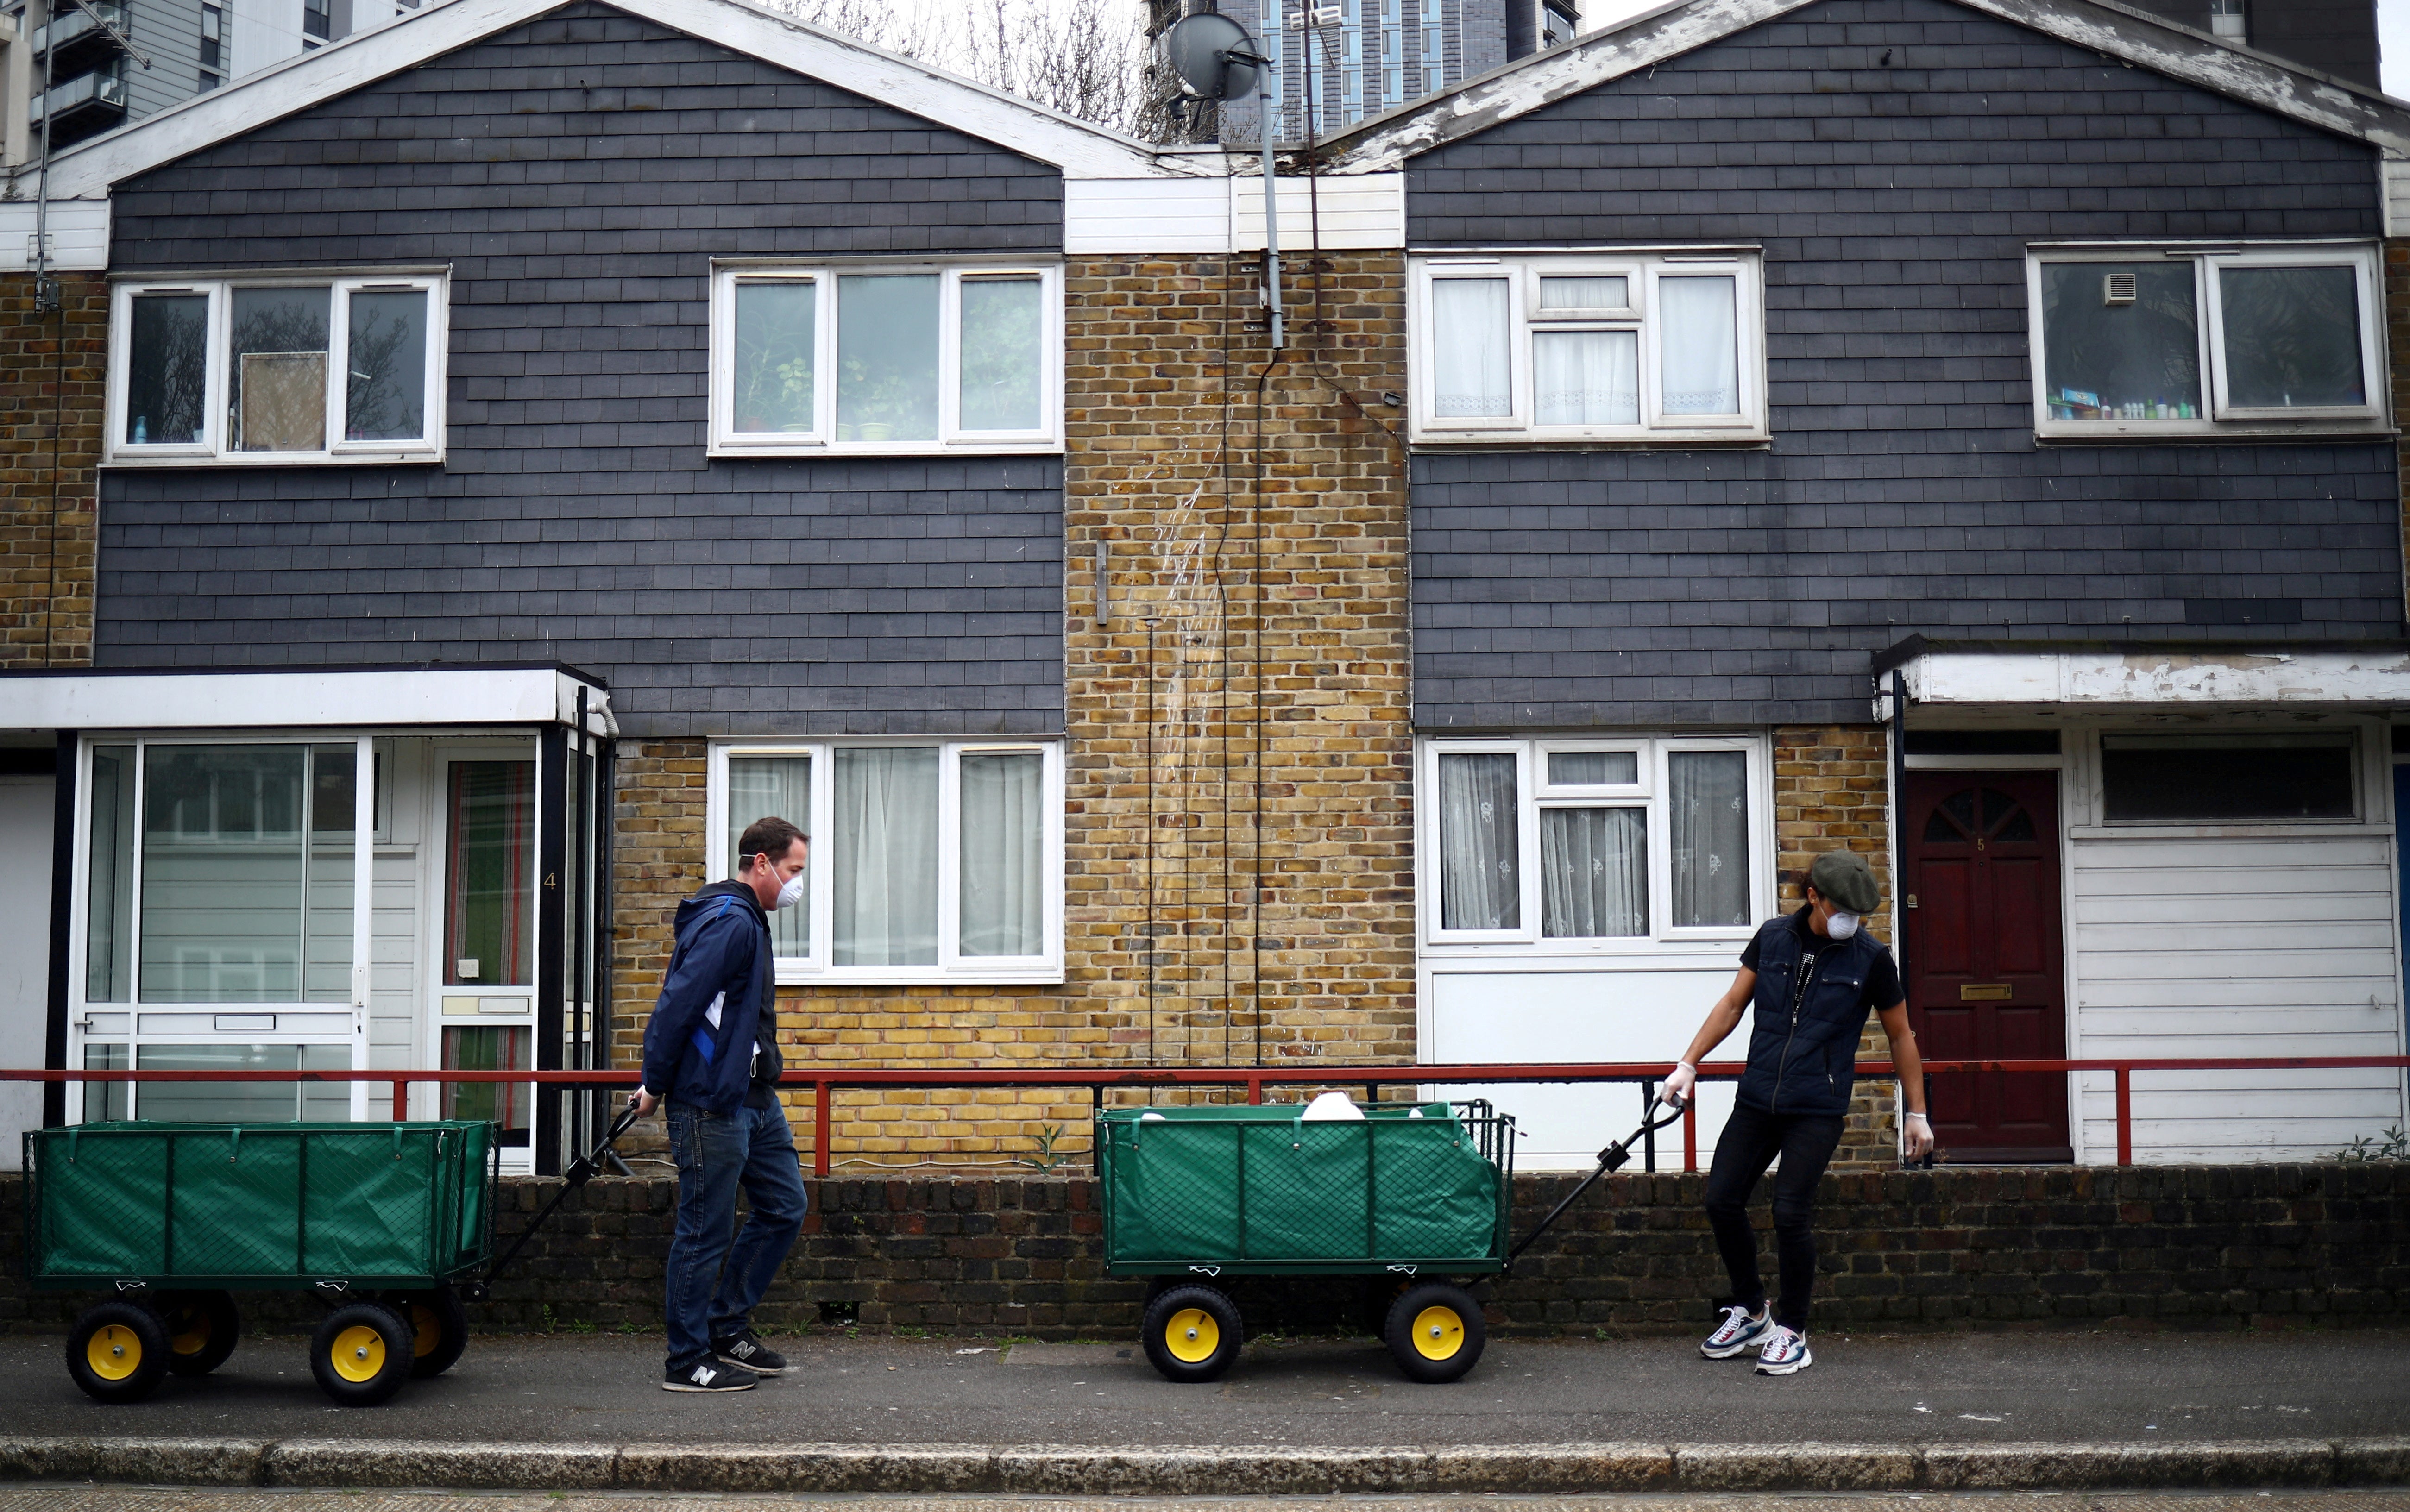 Volunteers cart food donations from a local food bank through the Carpenters Estate in Stratford in east London